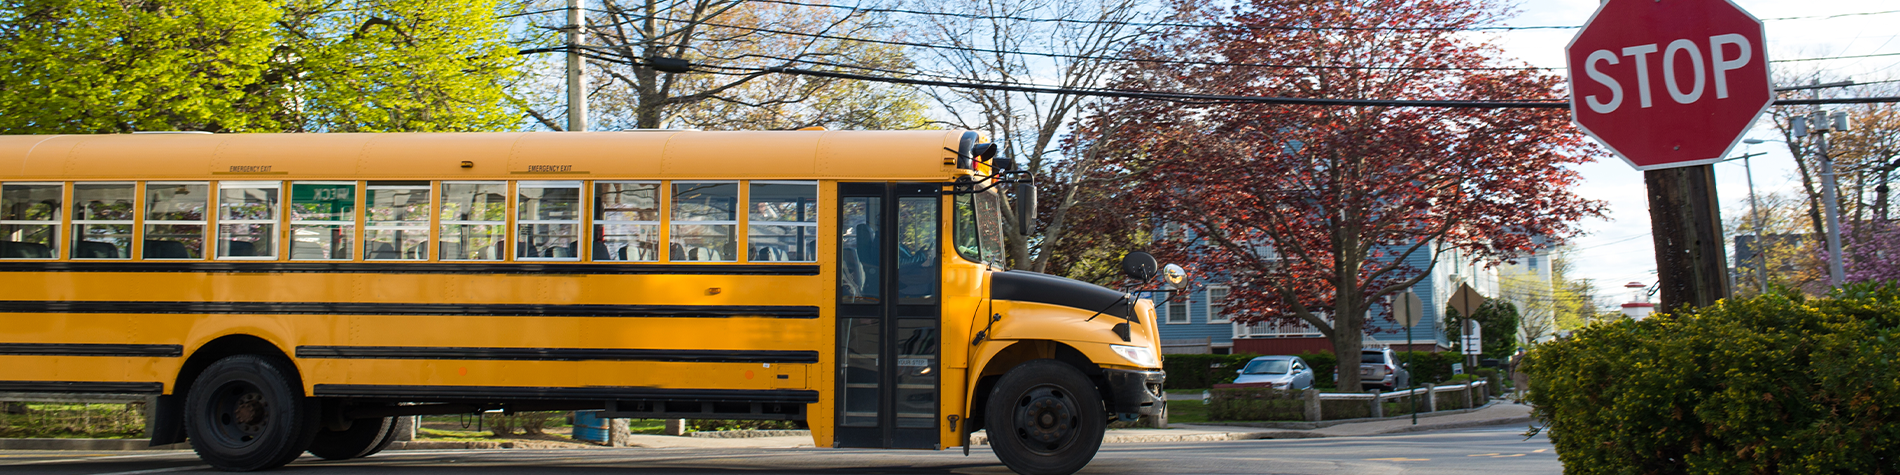 <p class="slider-title">Register Now for Yellow School Bus Service</p><div class="banner-line"></div><p class="slider-subtitle">Families must register by June 16 to be added to routes of the start of the next school year.</p> <a style="pointer-events:all" class=AEBannerMoreLink href="https://www.cbe.ab.ca/news-centre/Pages/register-now-for-yellow-school-bus-service.aspx">Read More</a>